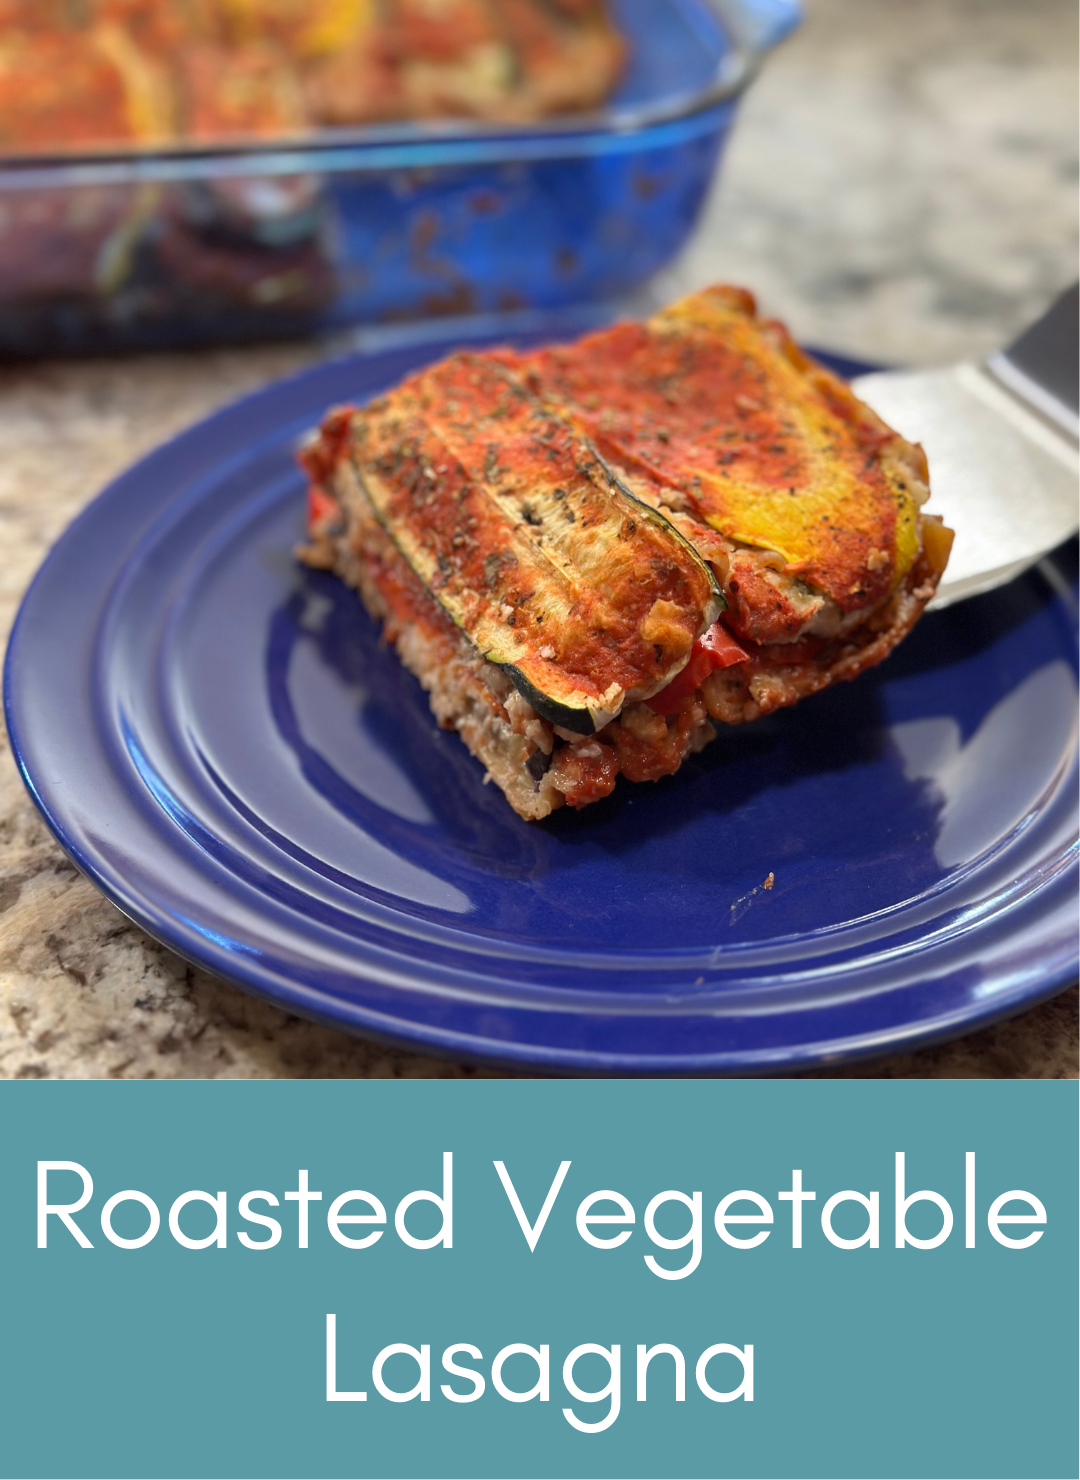 Vegan whole food plant based roasted vegetable lasagna with cashew ricotta Picture with link to recipe